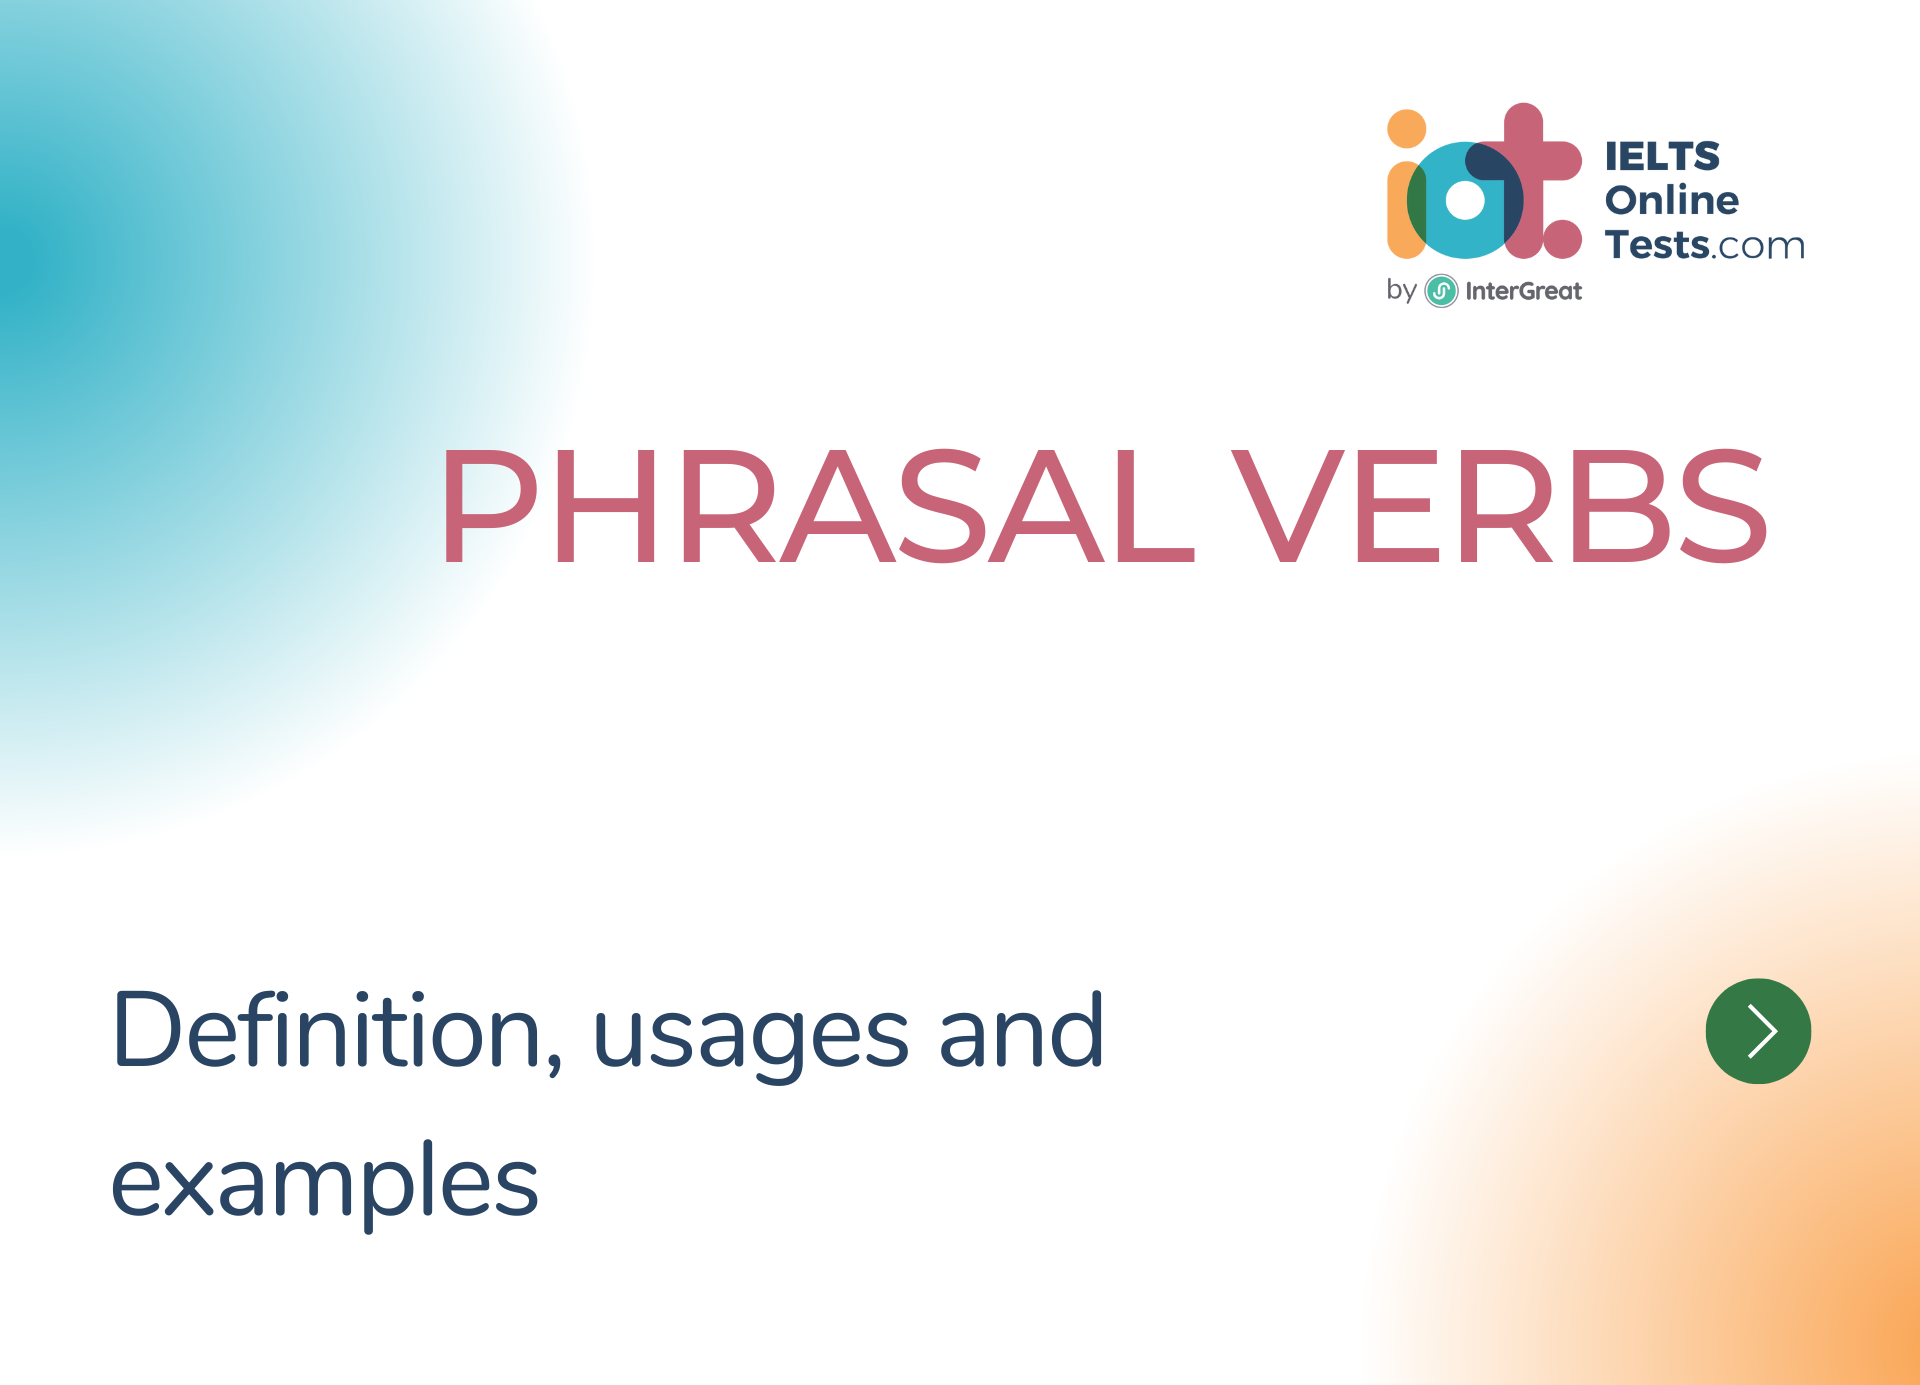 Phrasal verb definition, usages and examples